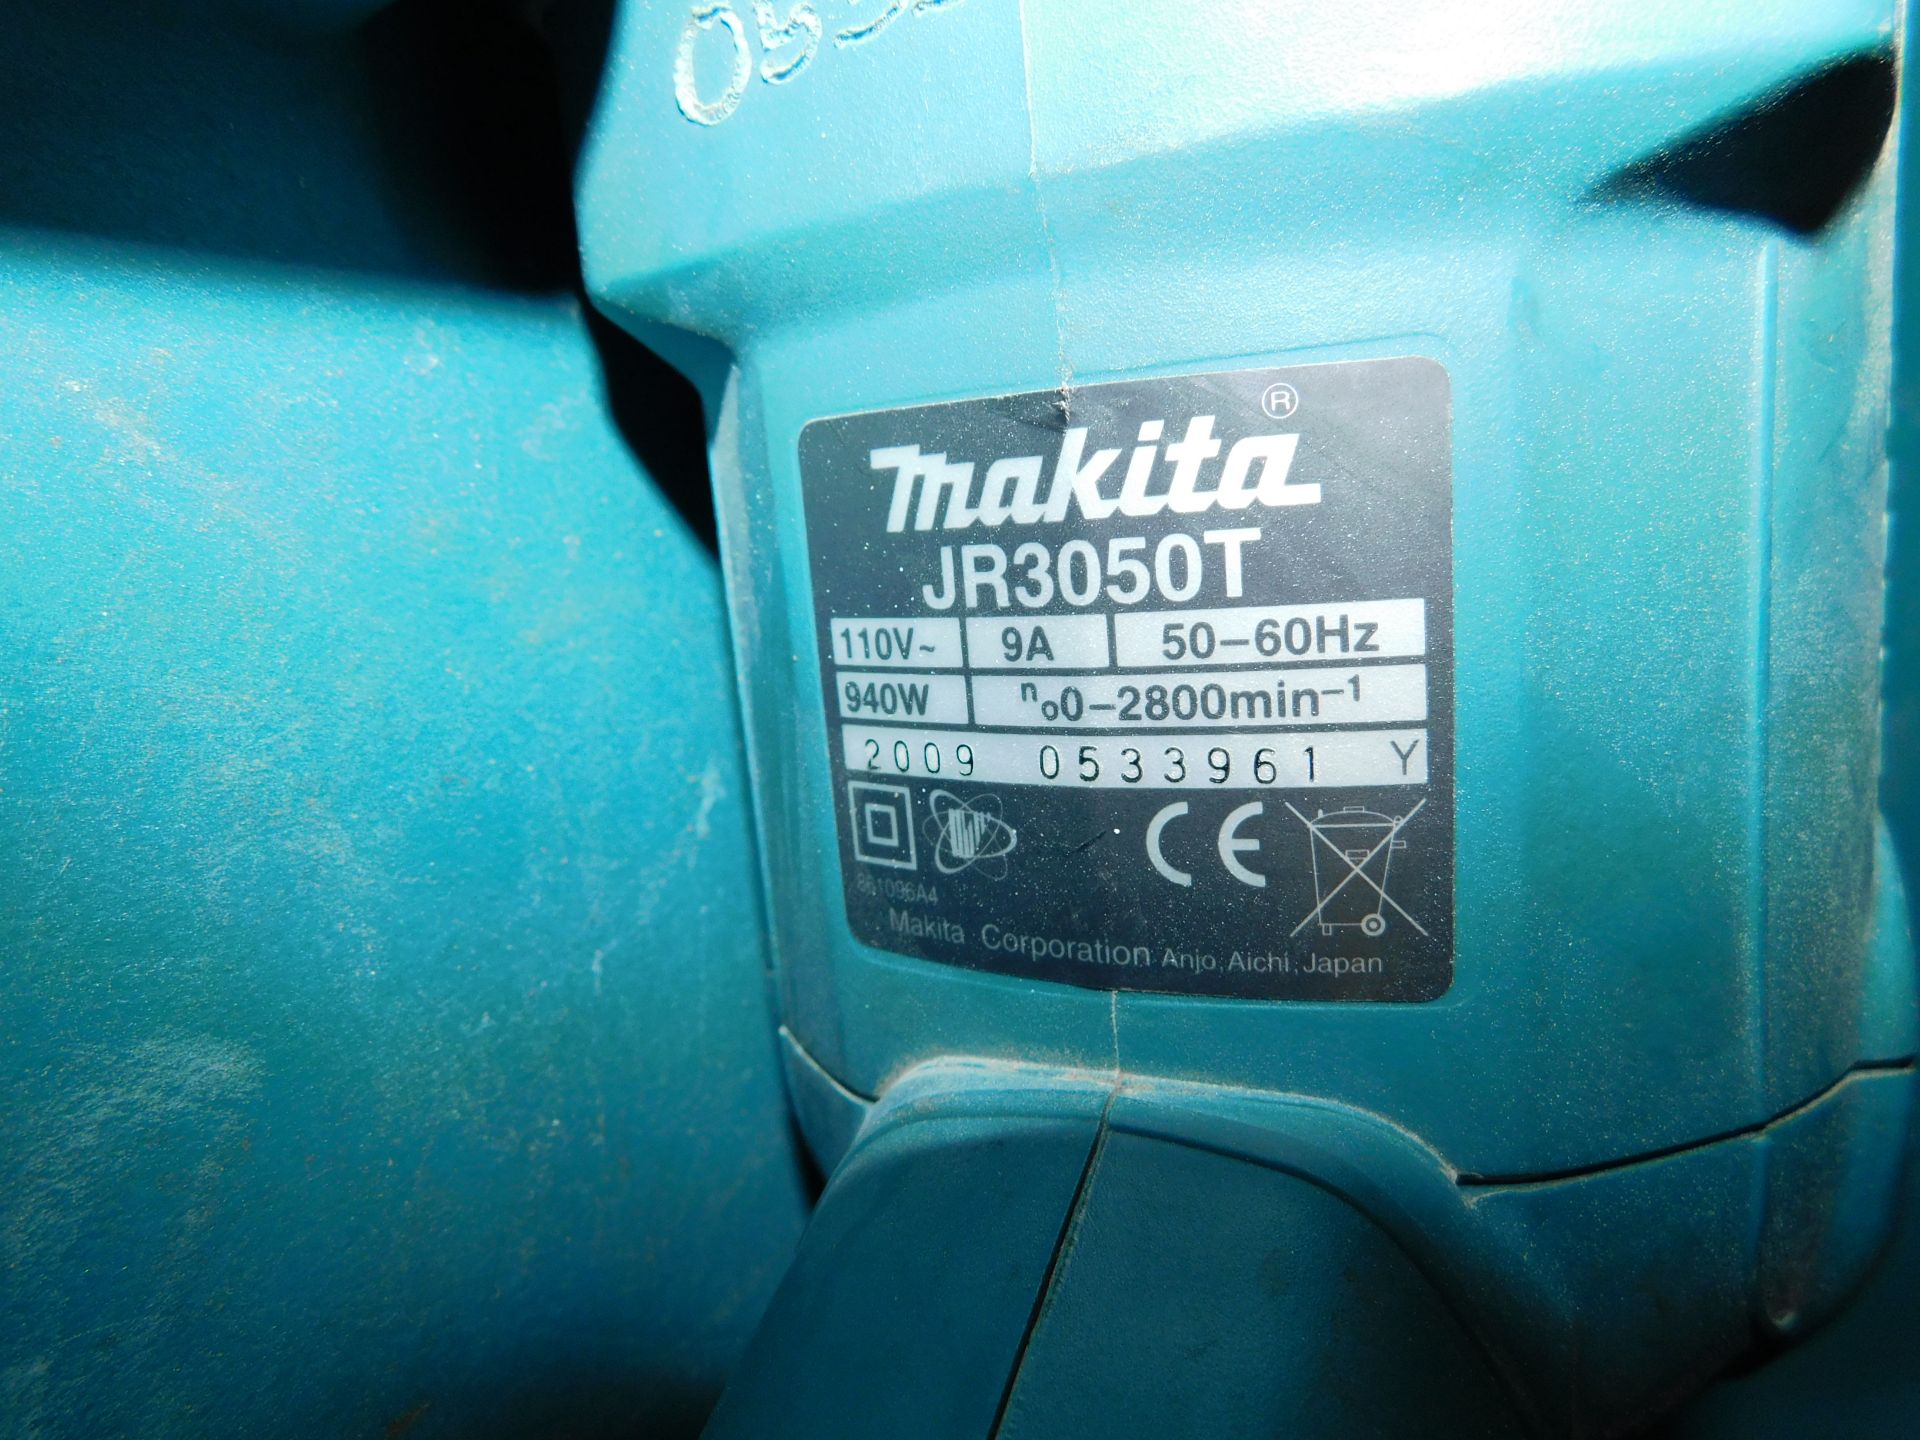 Makita JR3050T Reciprocating Saw, 110v (Location: Stockport. Please Refer to General Notes) - Image 4 of 4